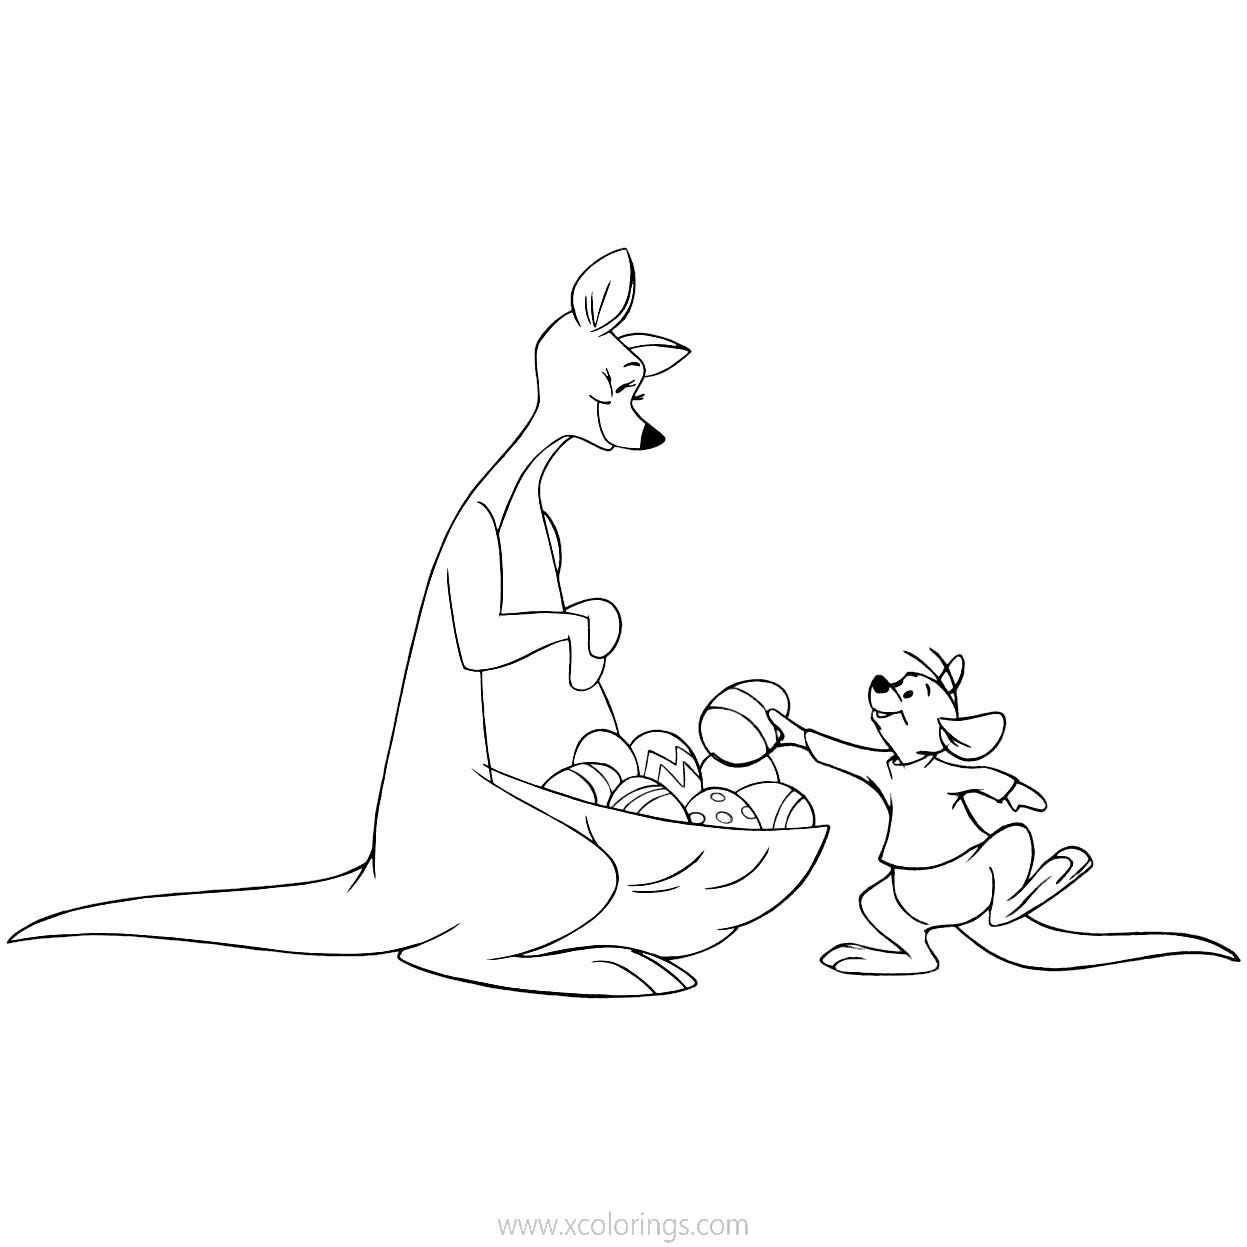 Free Disney Winnie The Pooh Easter Coloring Pages Kanga and Roo printable